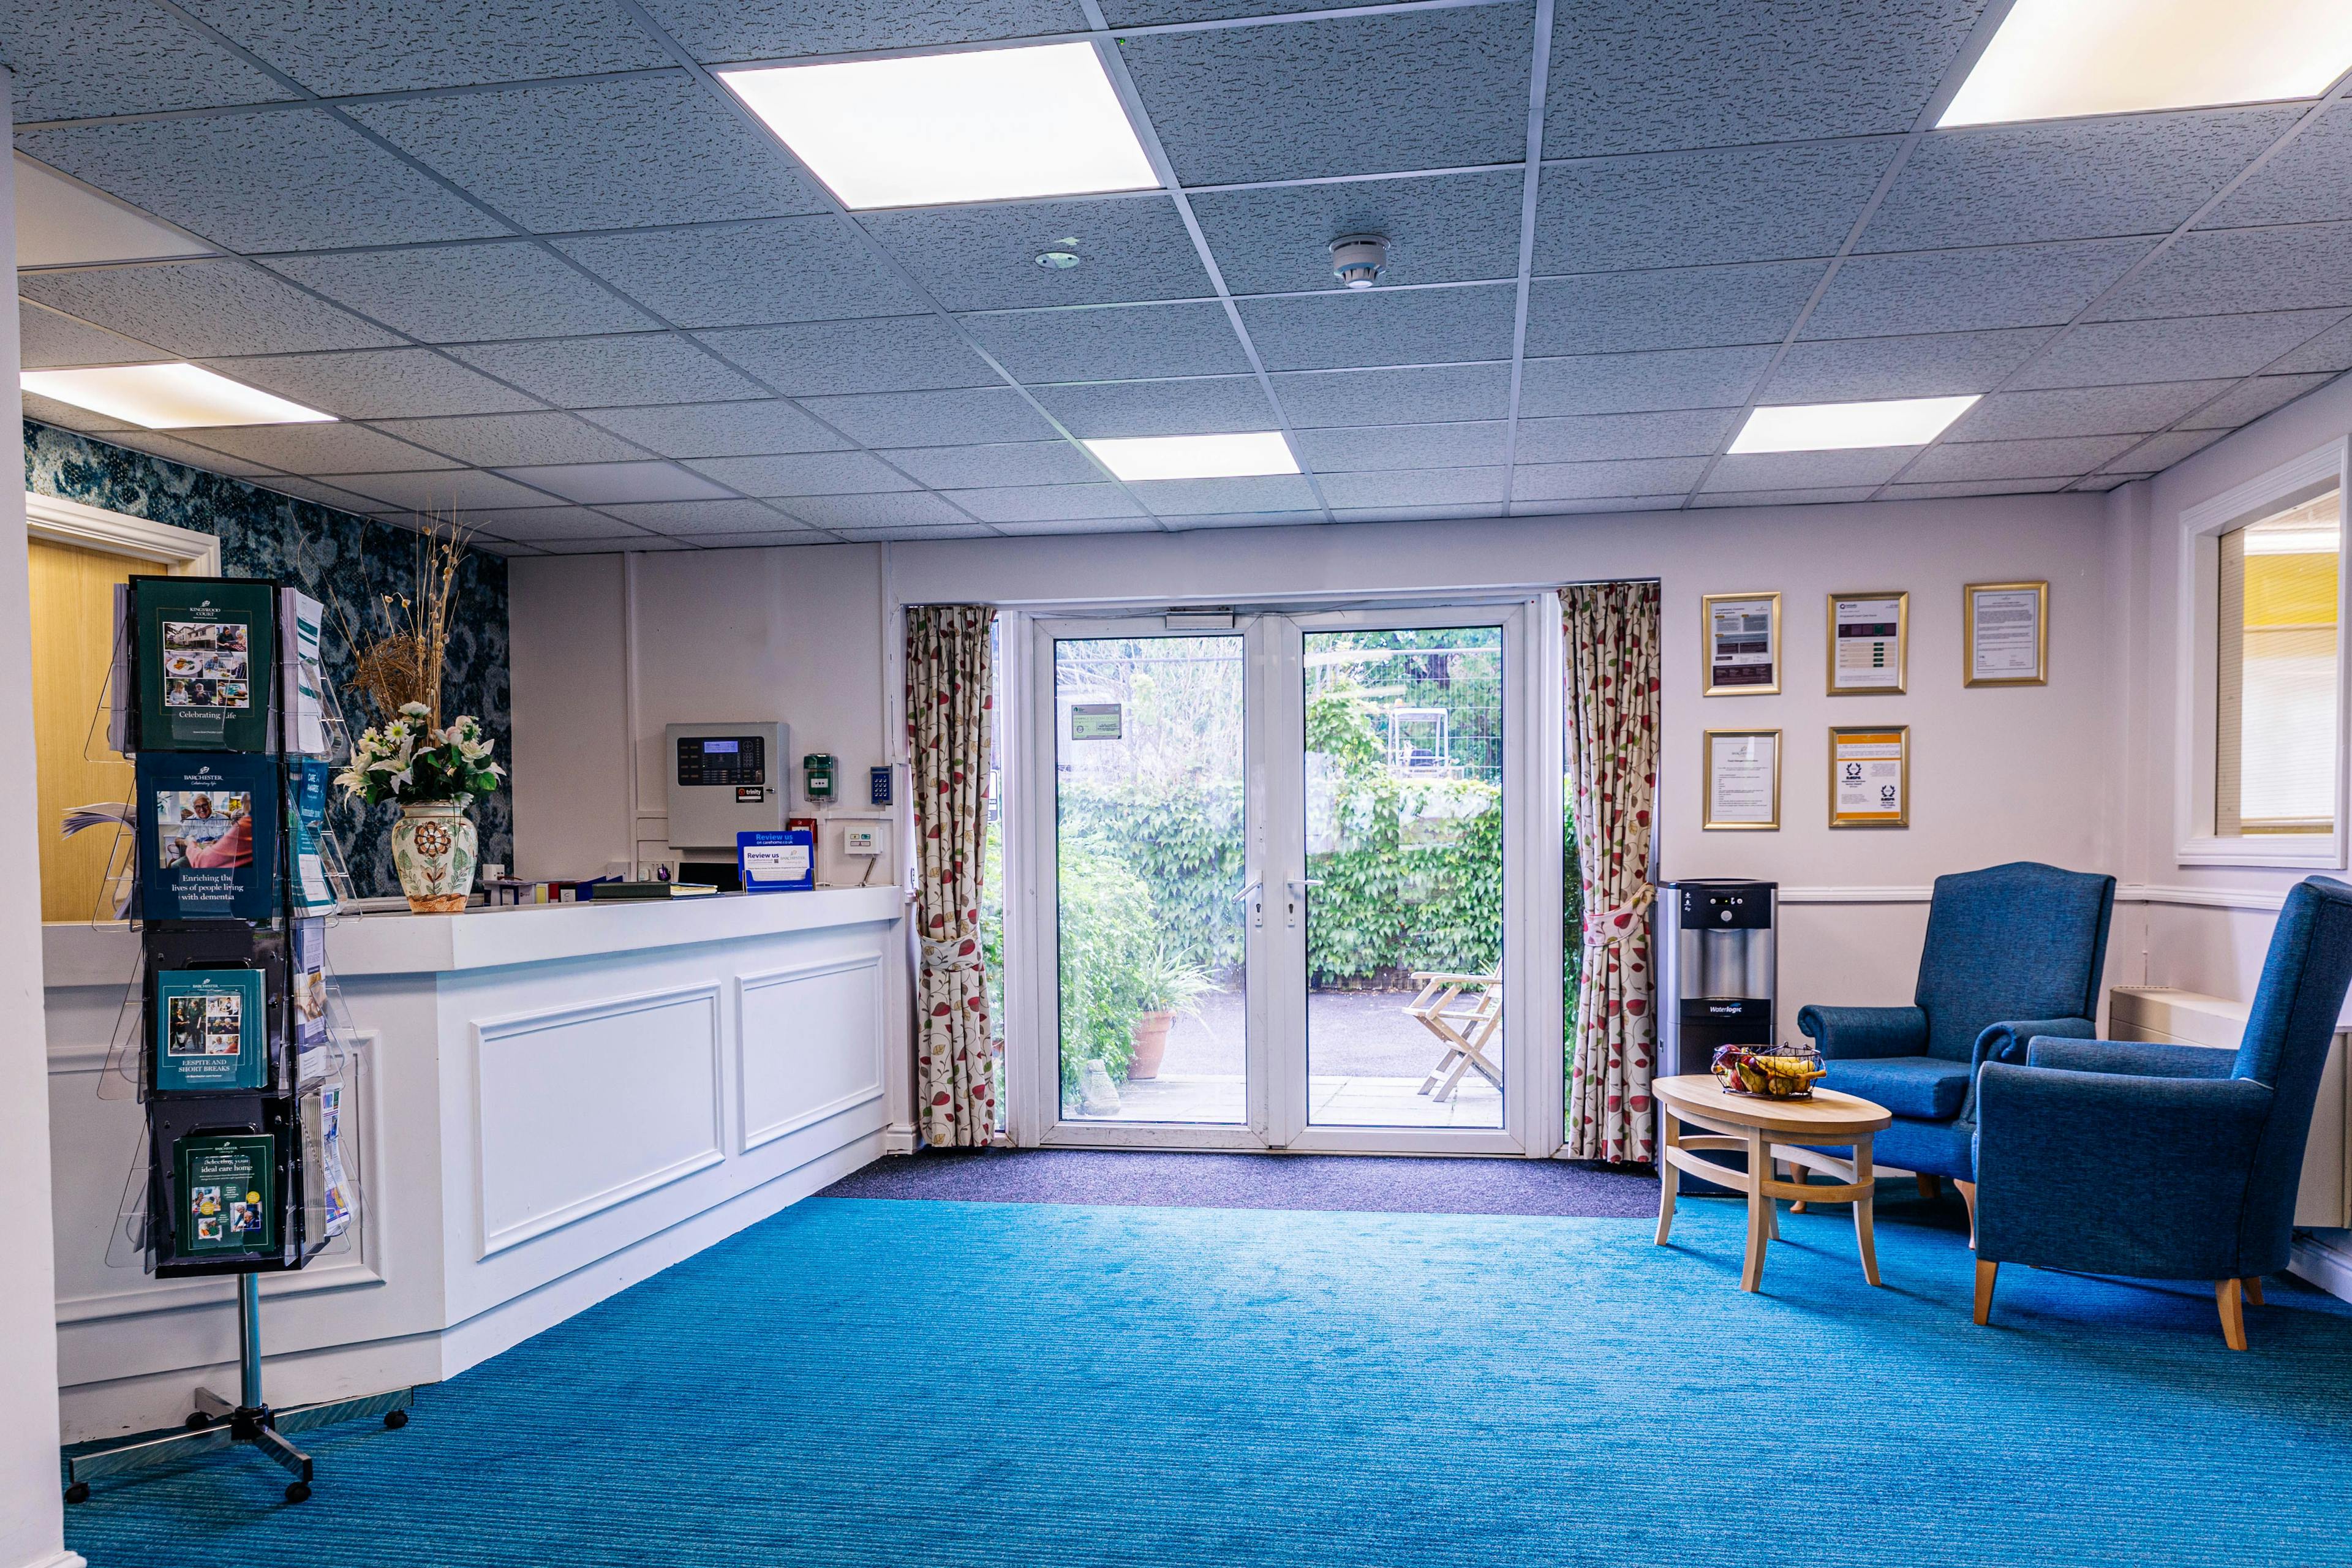 Reception of Kingswood Court Care Home in Bristol, South West England